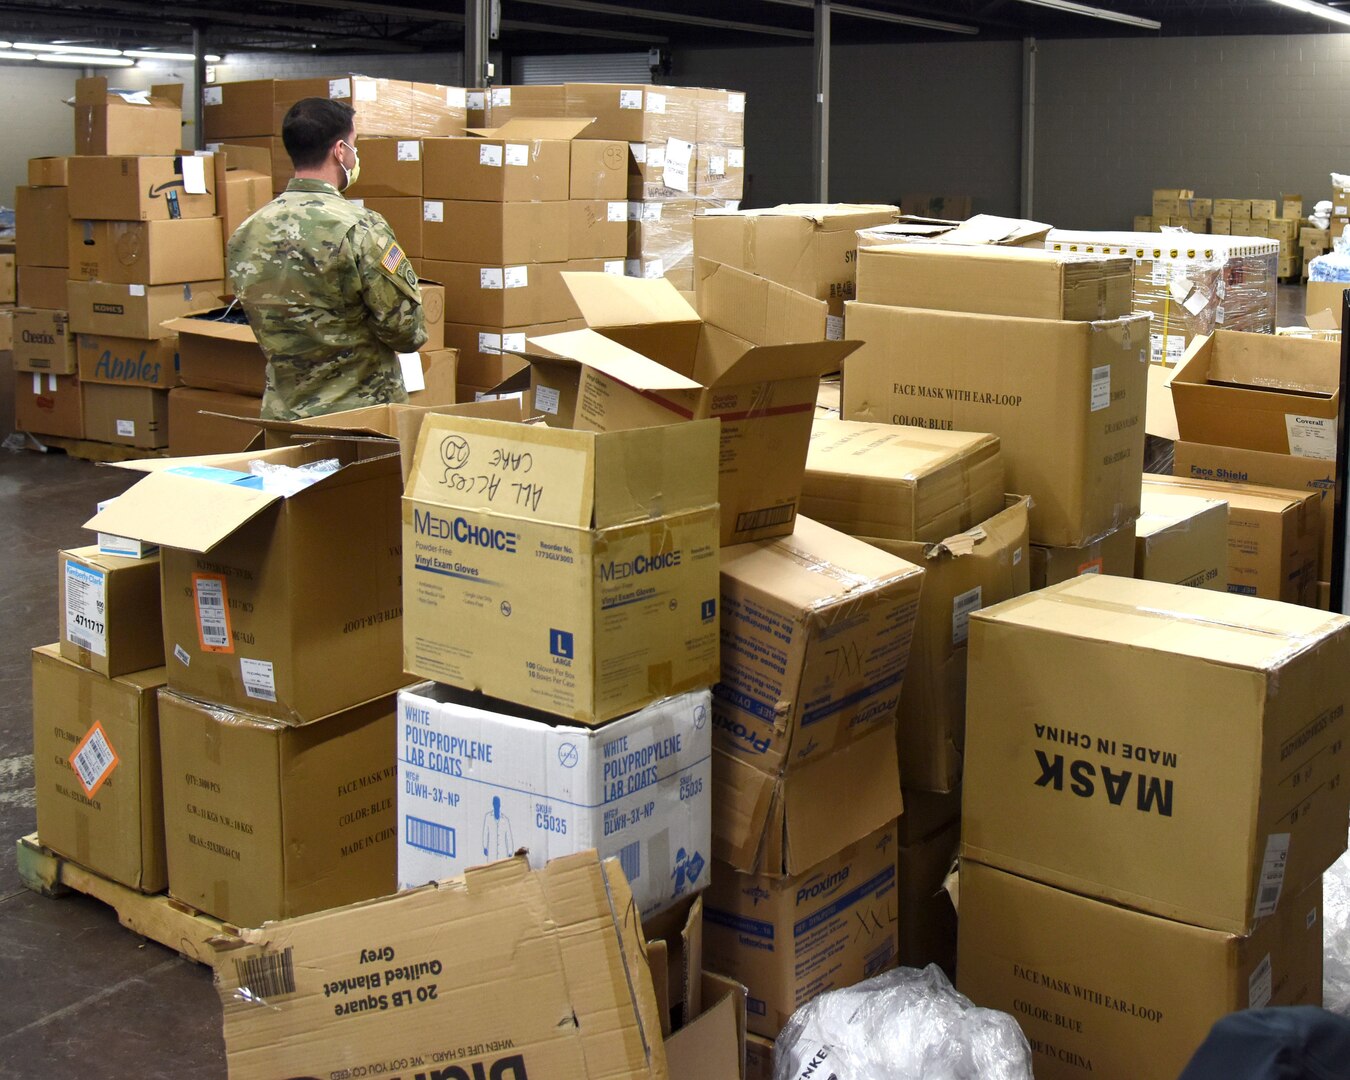 Staff Sgt. Scott Horrigan, 1st Battalion, 125th Regiment, Michigan Army National Guard, works at a Kent County warehouse to help organize and distribute personal protection equipment to medical facilities throughout the state April 15, 2020.